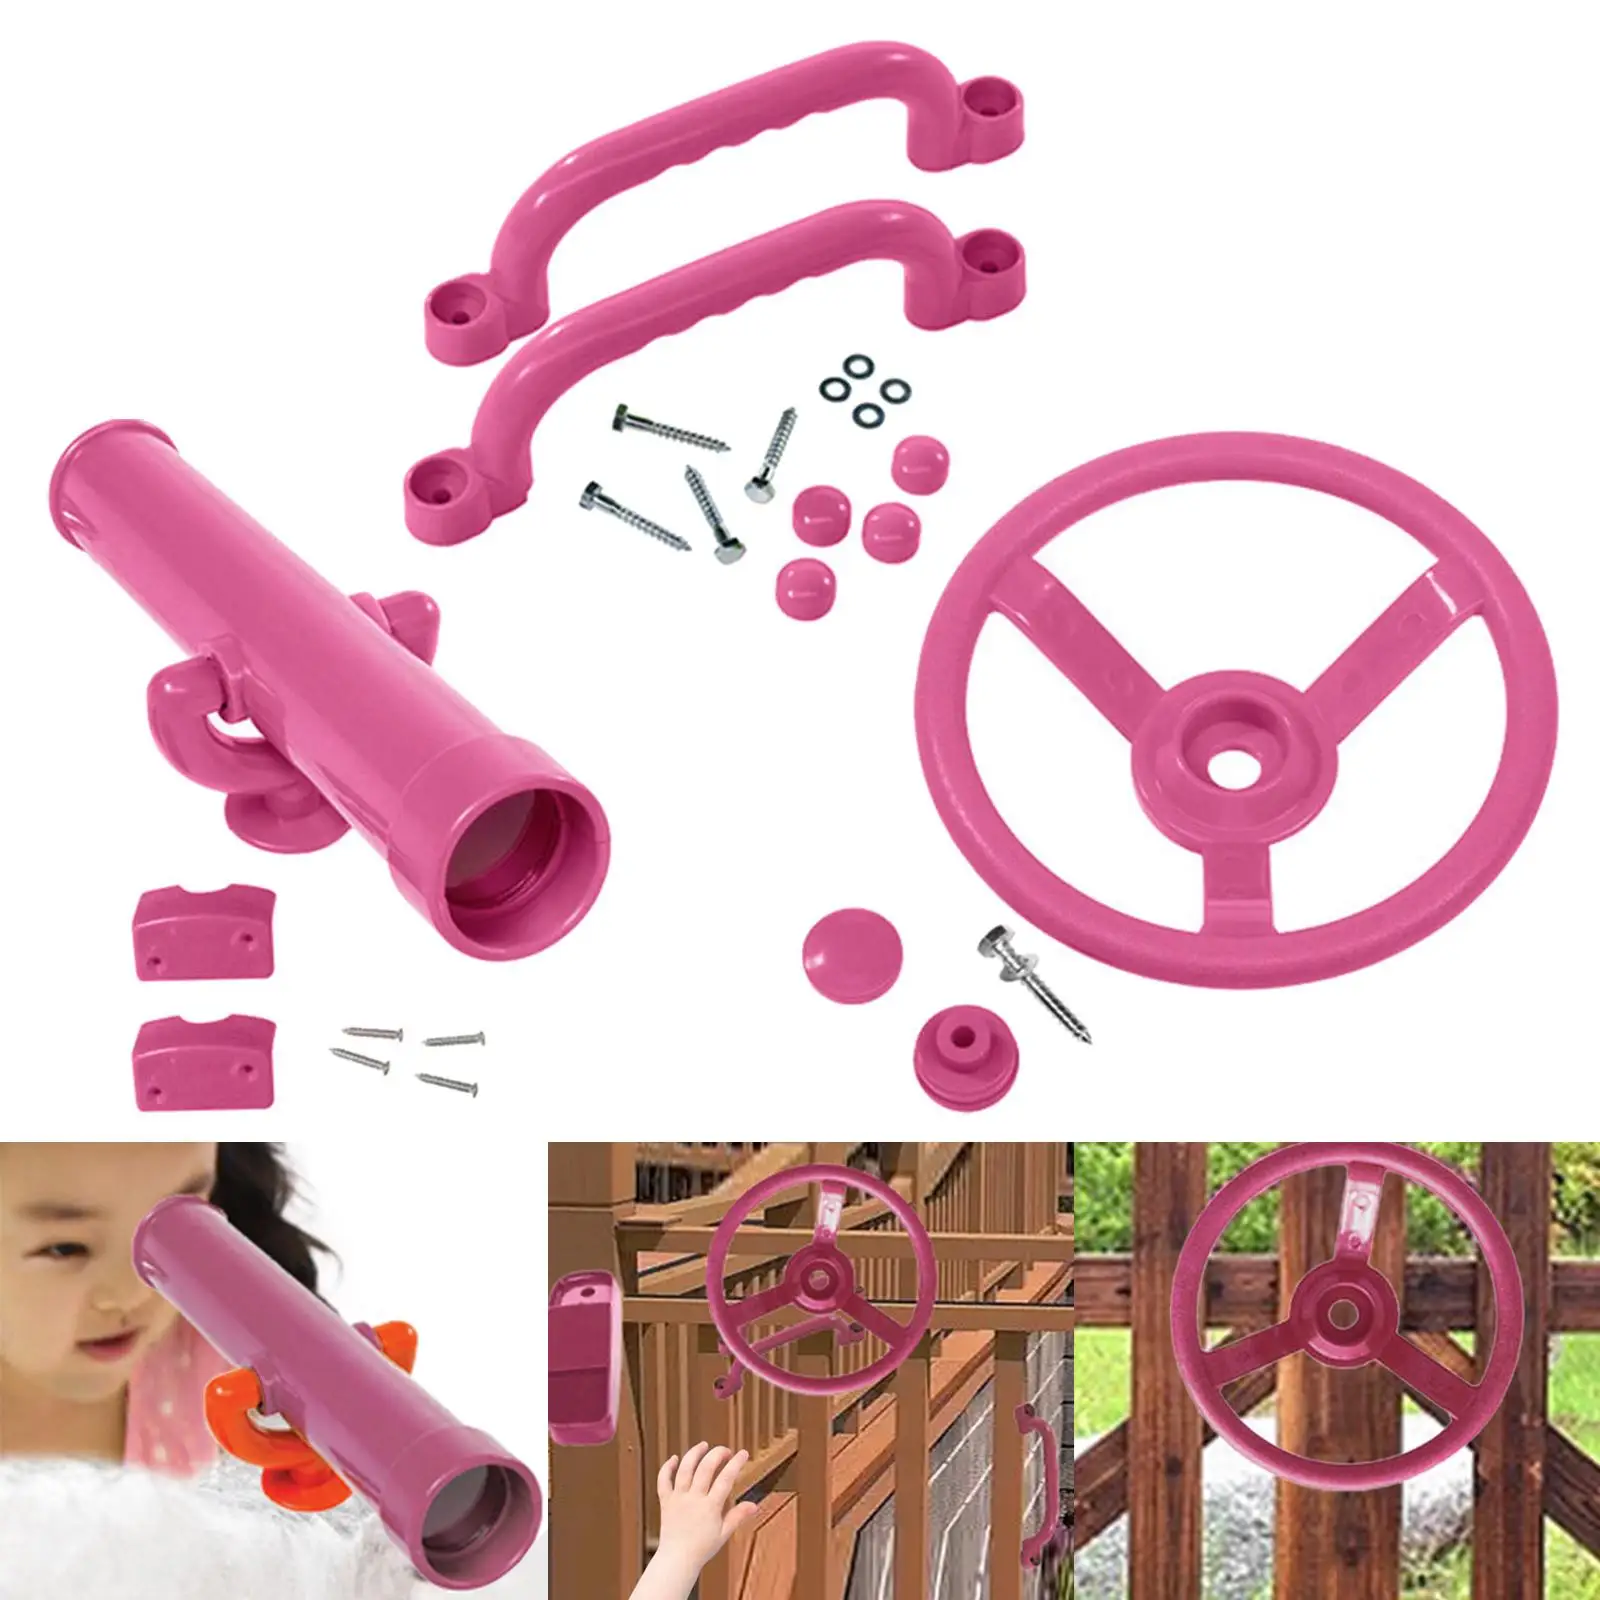 Playground Accessories Easy to Install Pirate Ship Wheel for Kids for Treehouse Swingset Backyard Playhouse Climbing Frame